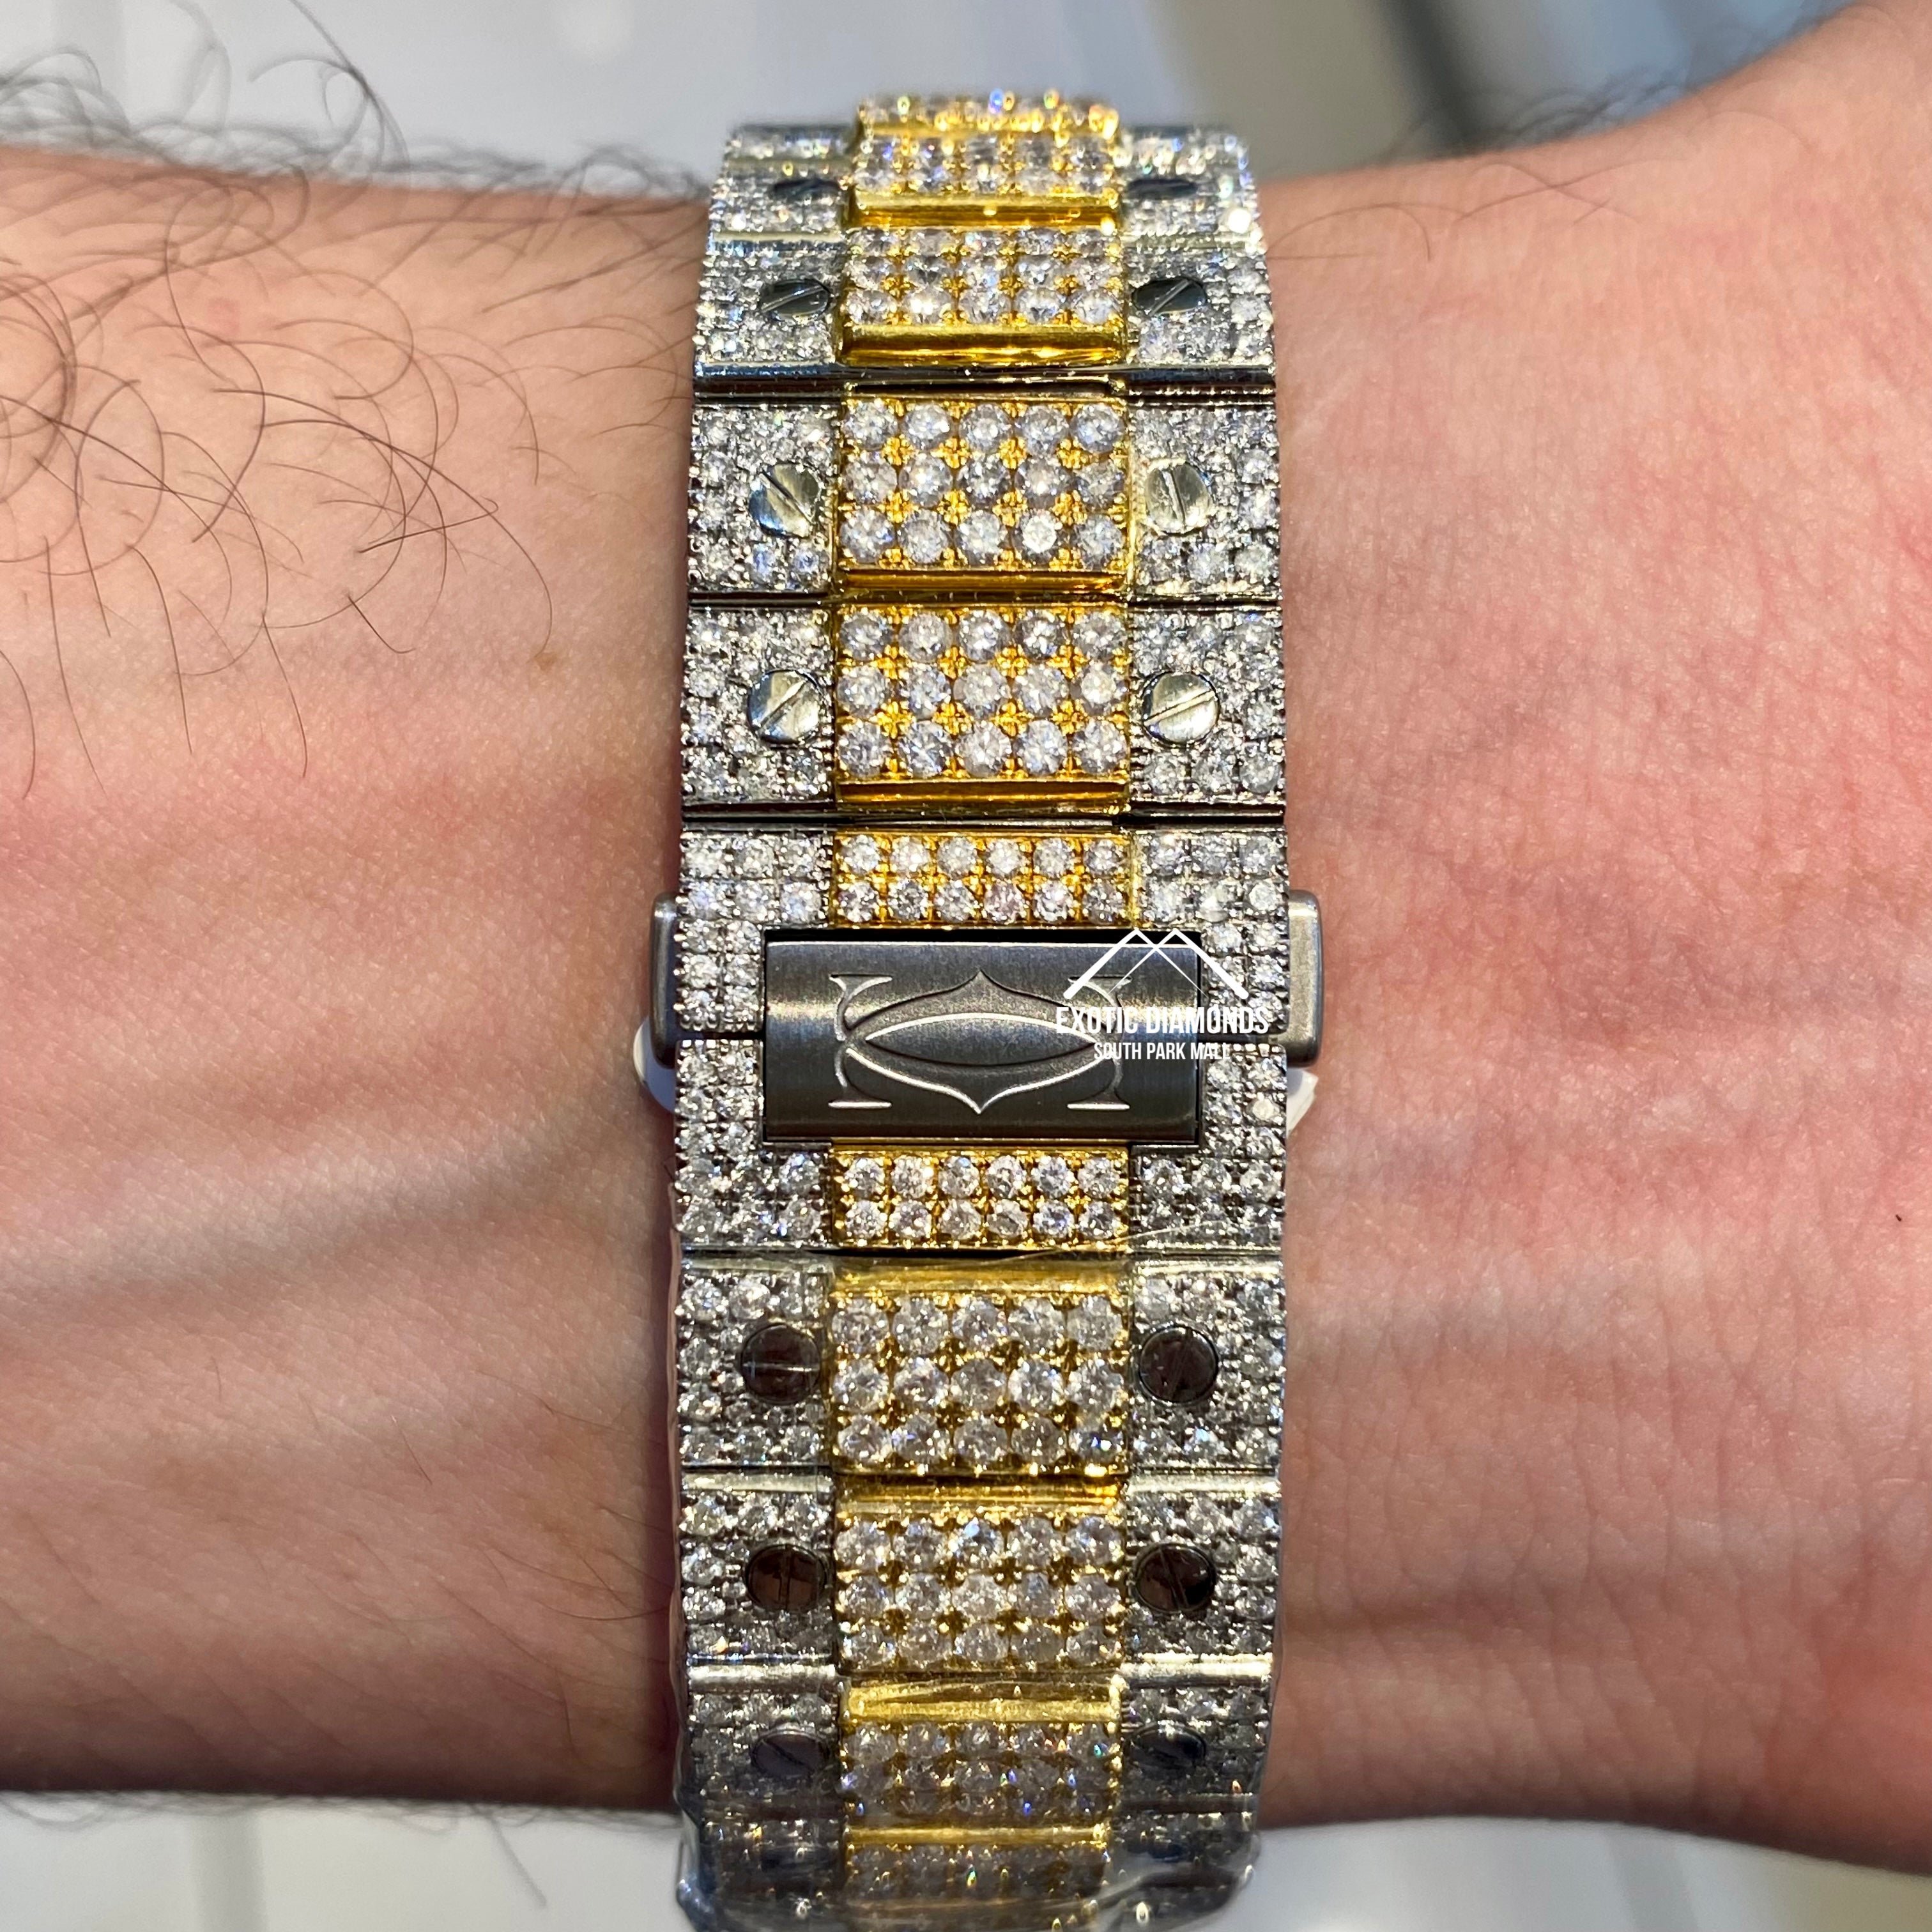 Cartier Santos Xl with Large Diamond Bezel and Raised Prong Setting Diamonds on Band